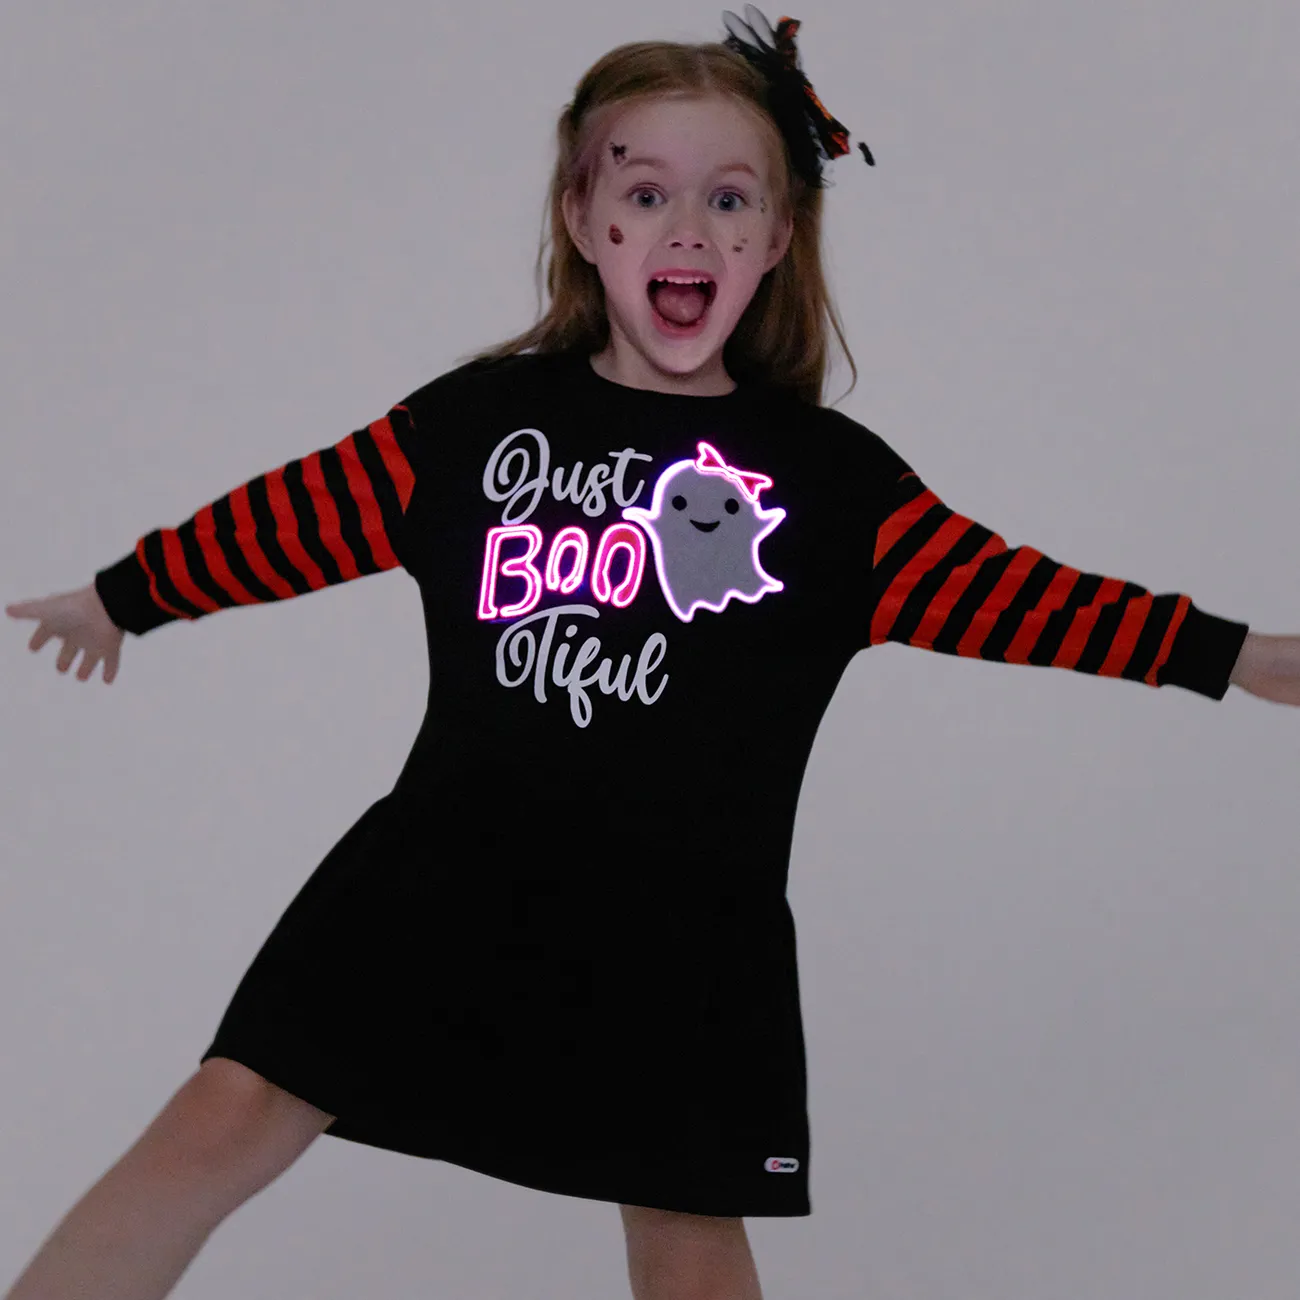 Go-Glow Illuminating Sweatshirt Dress with Light Up Print and Letters Including Controller (Built-In Battery) Black big image 1